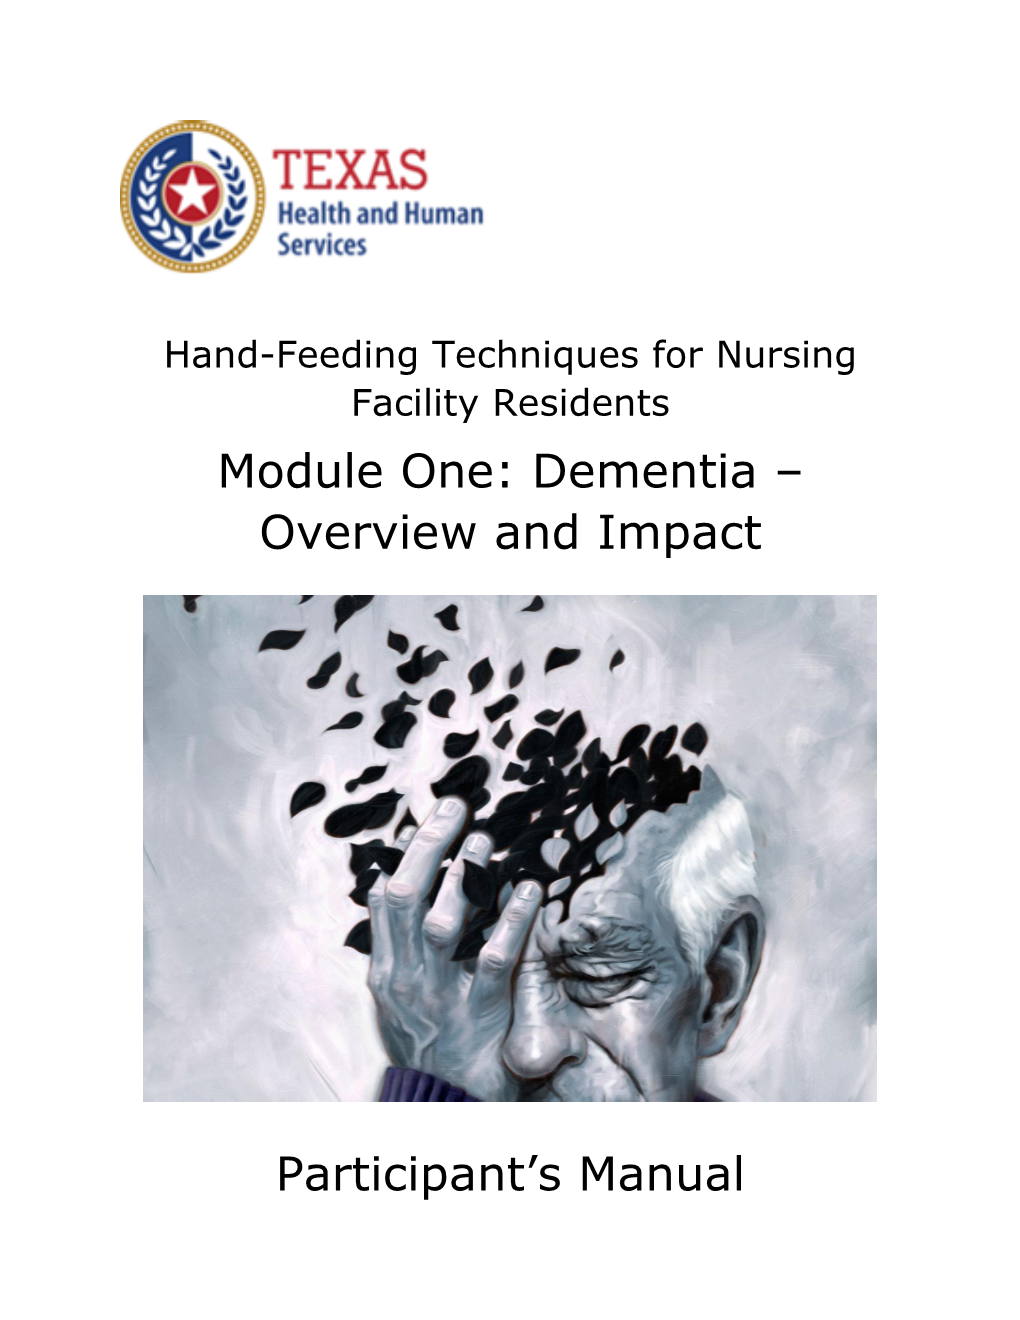 Module One: Dementia – Overview and Impact